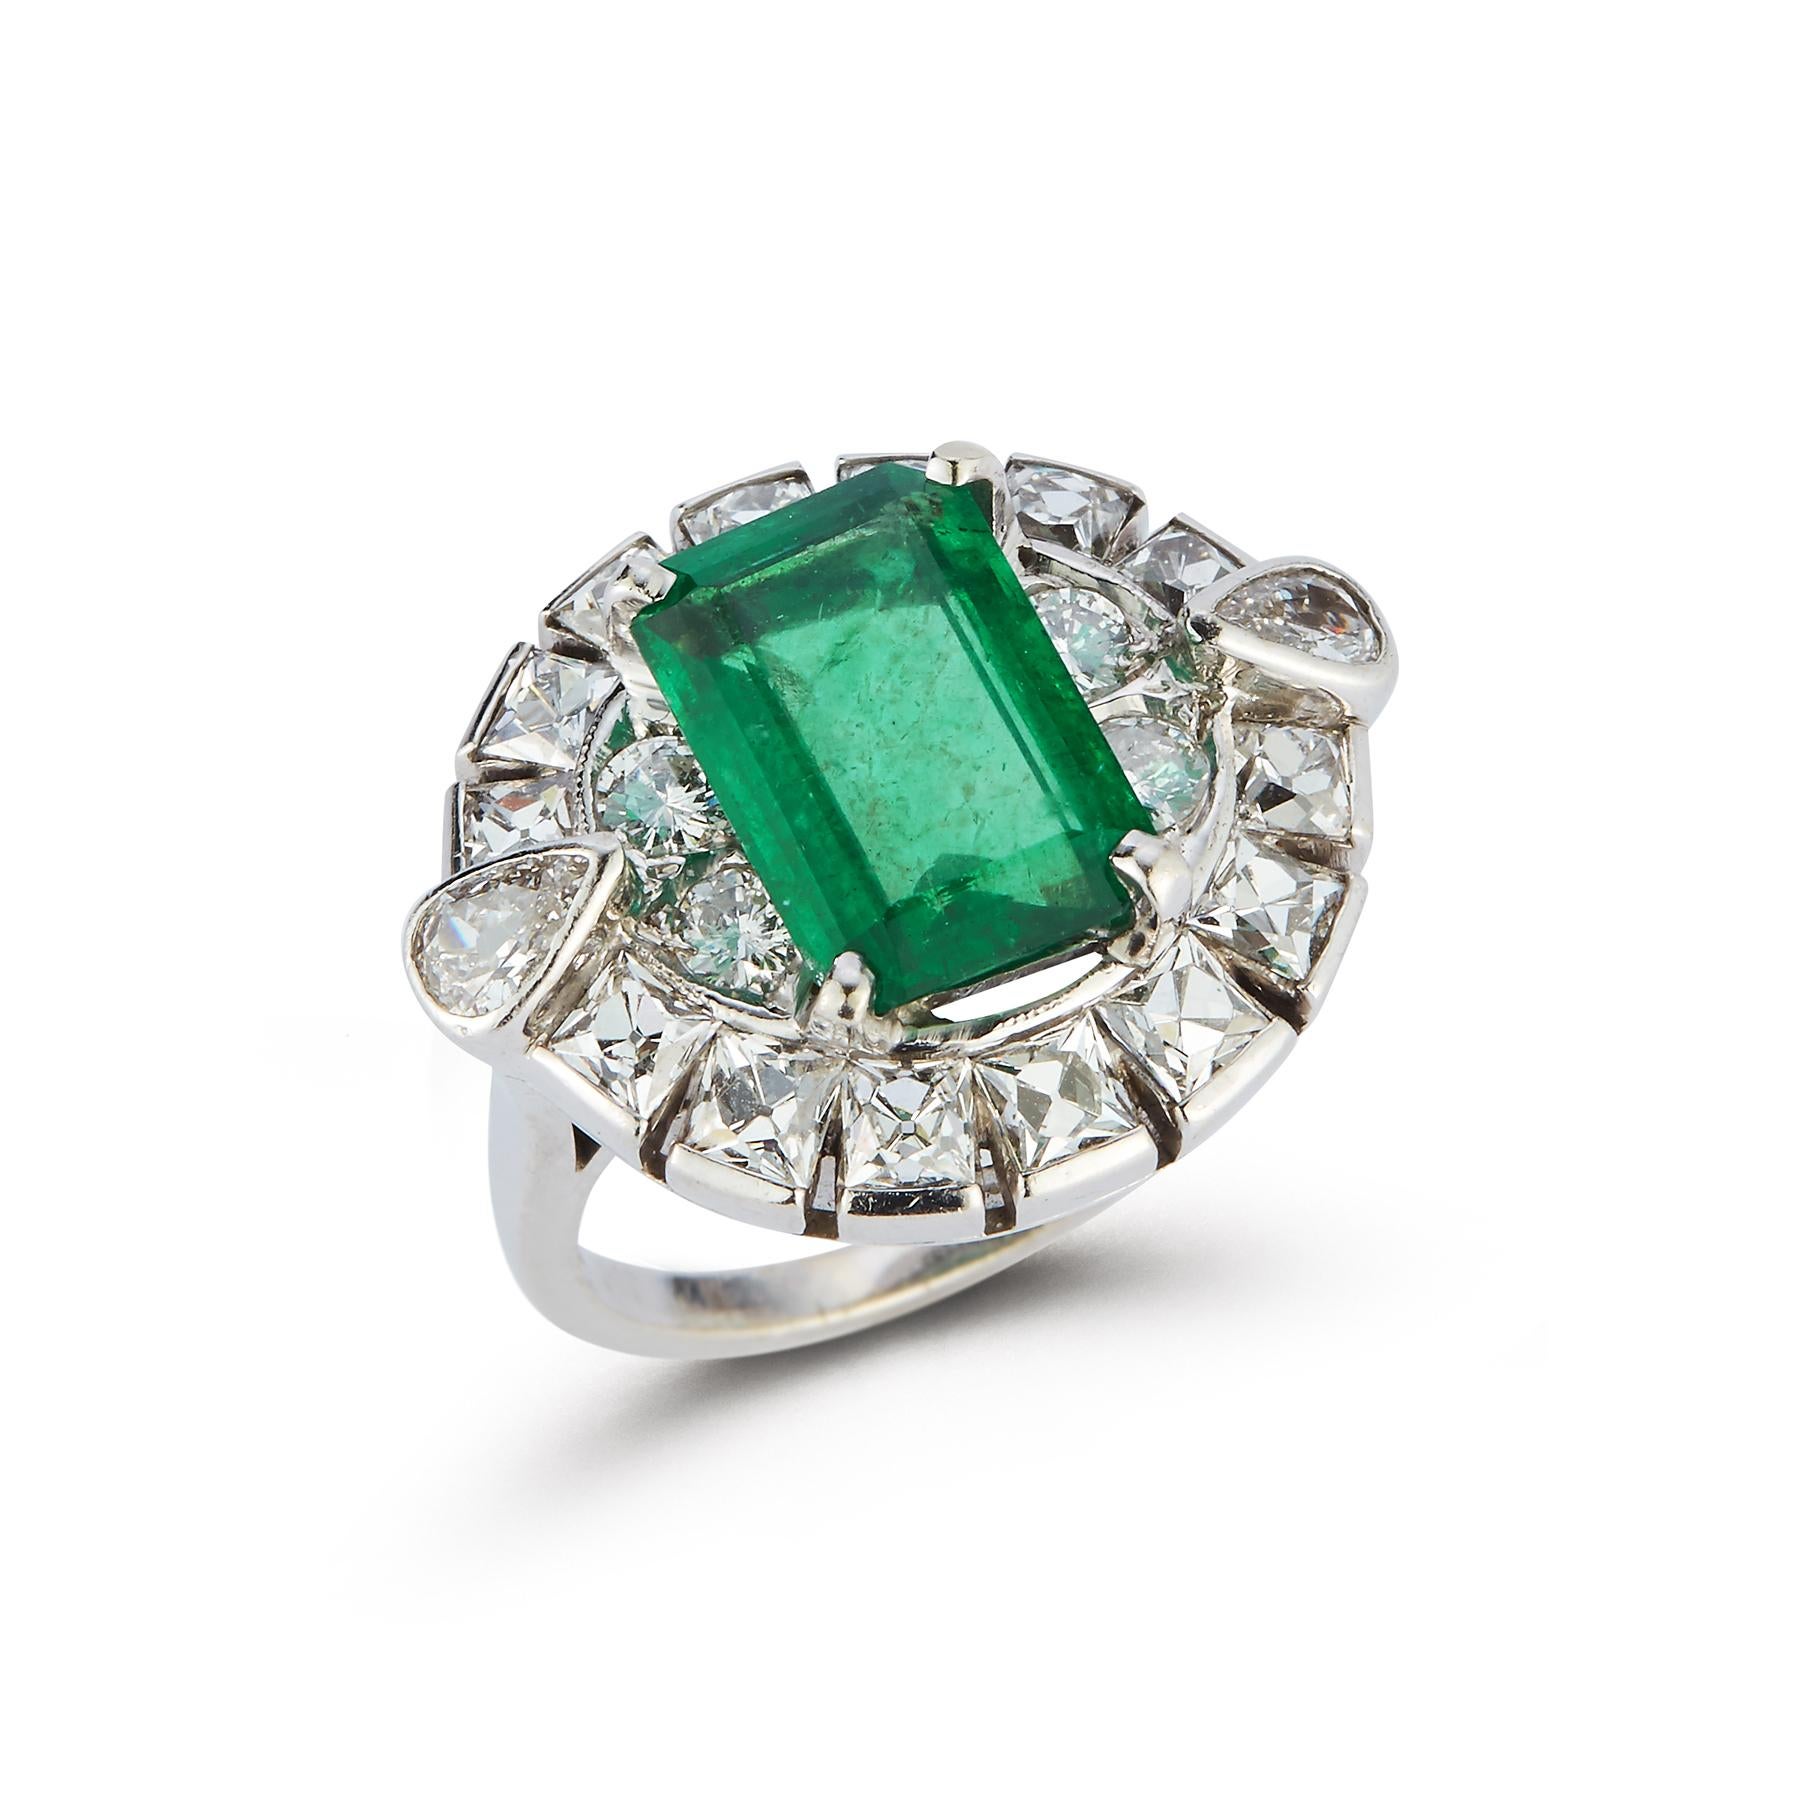 Emerald Cocktail Ring

Emerald approximately 5.62 Carat with 2 Pear Shape Side Diamonds approximately 0.28 Carats and 
4 Side Brilliant Cut Diamonds approximately 0.40 Carats
Within a border of 14 French Cut Diamonds approximately 2.30 Carats
14k